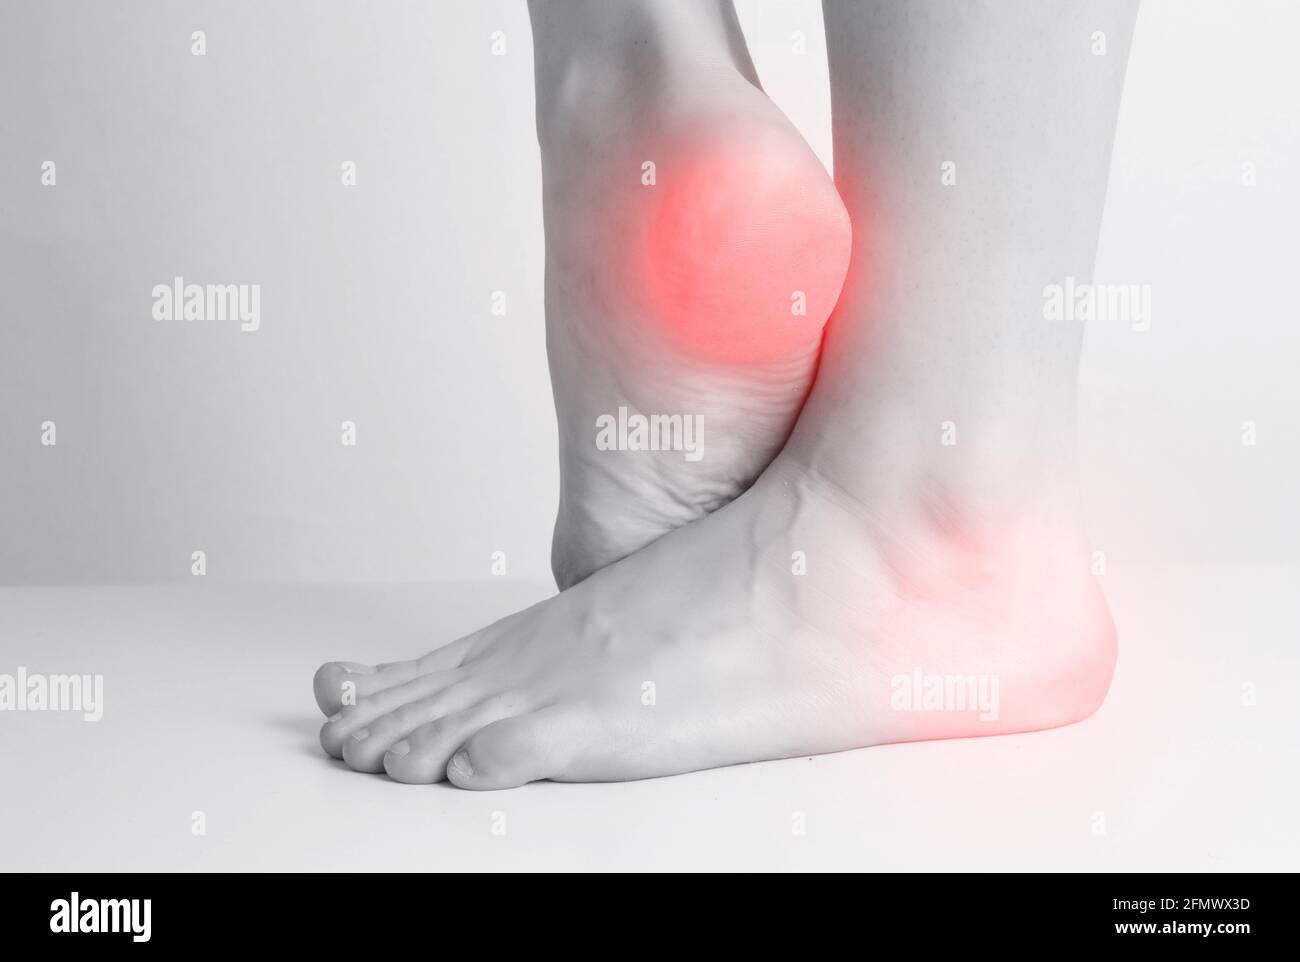 Black and white photograph with a red heel in a person. Heel pain concept. Osteoprosis and leg cramps Stock Photo